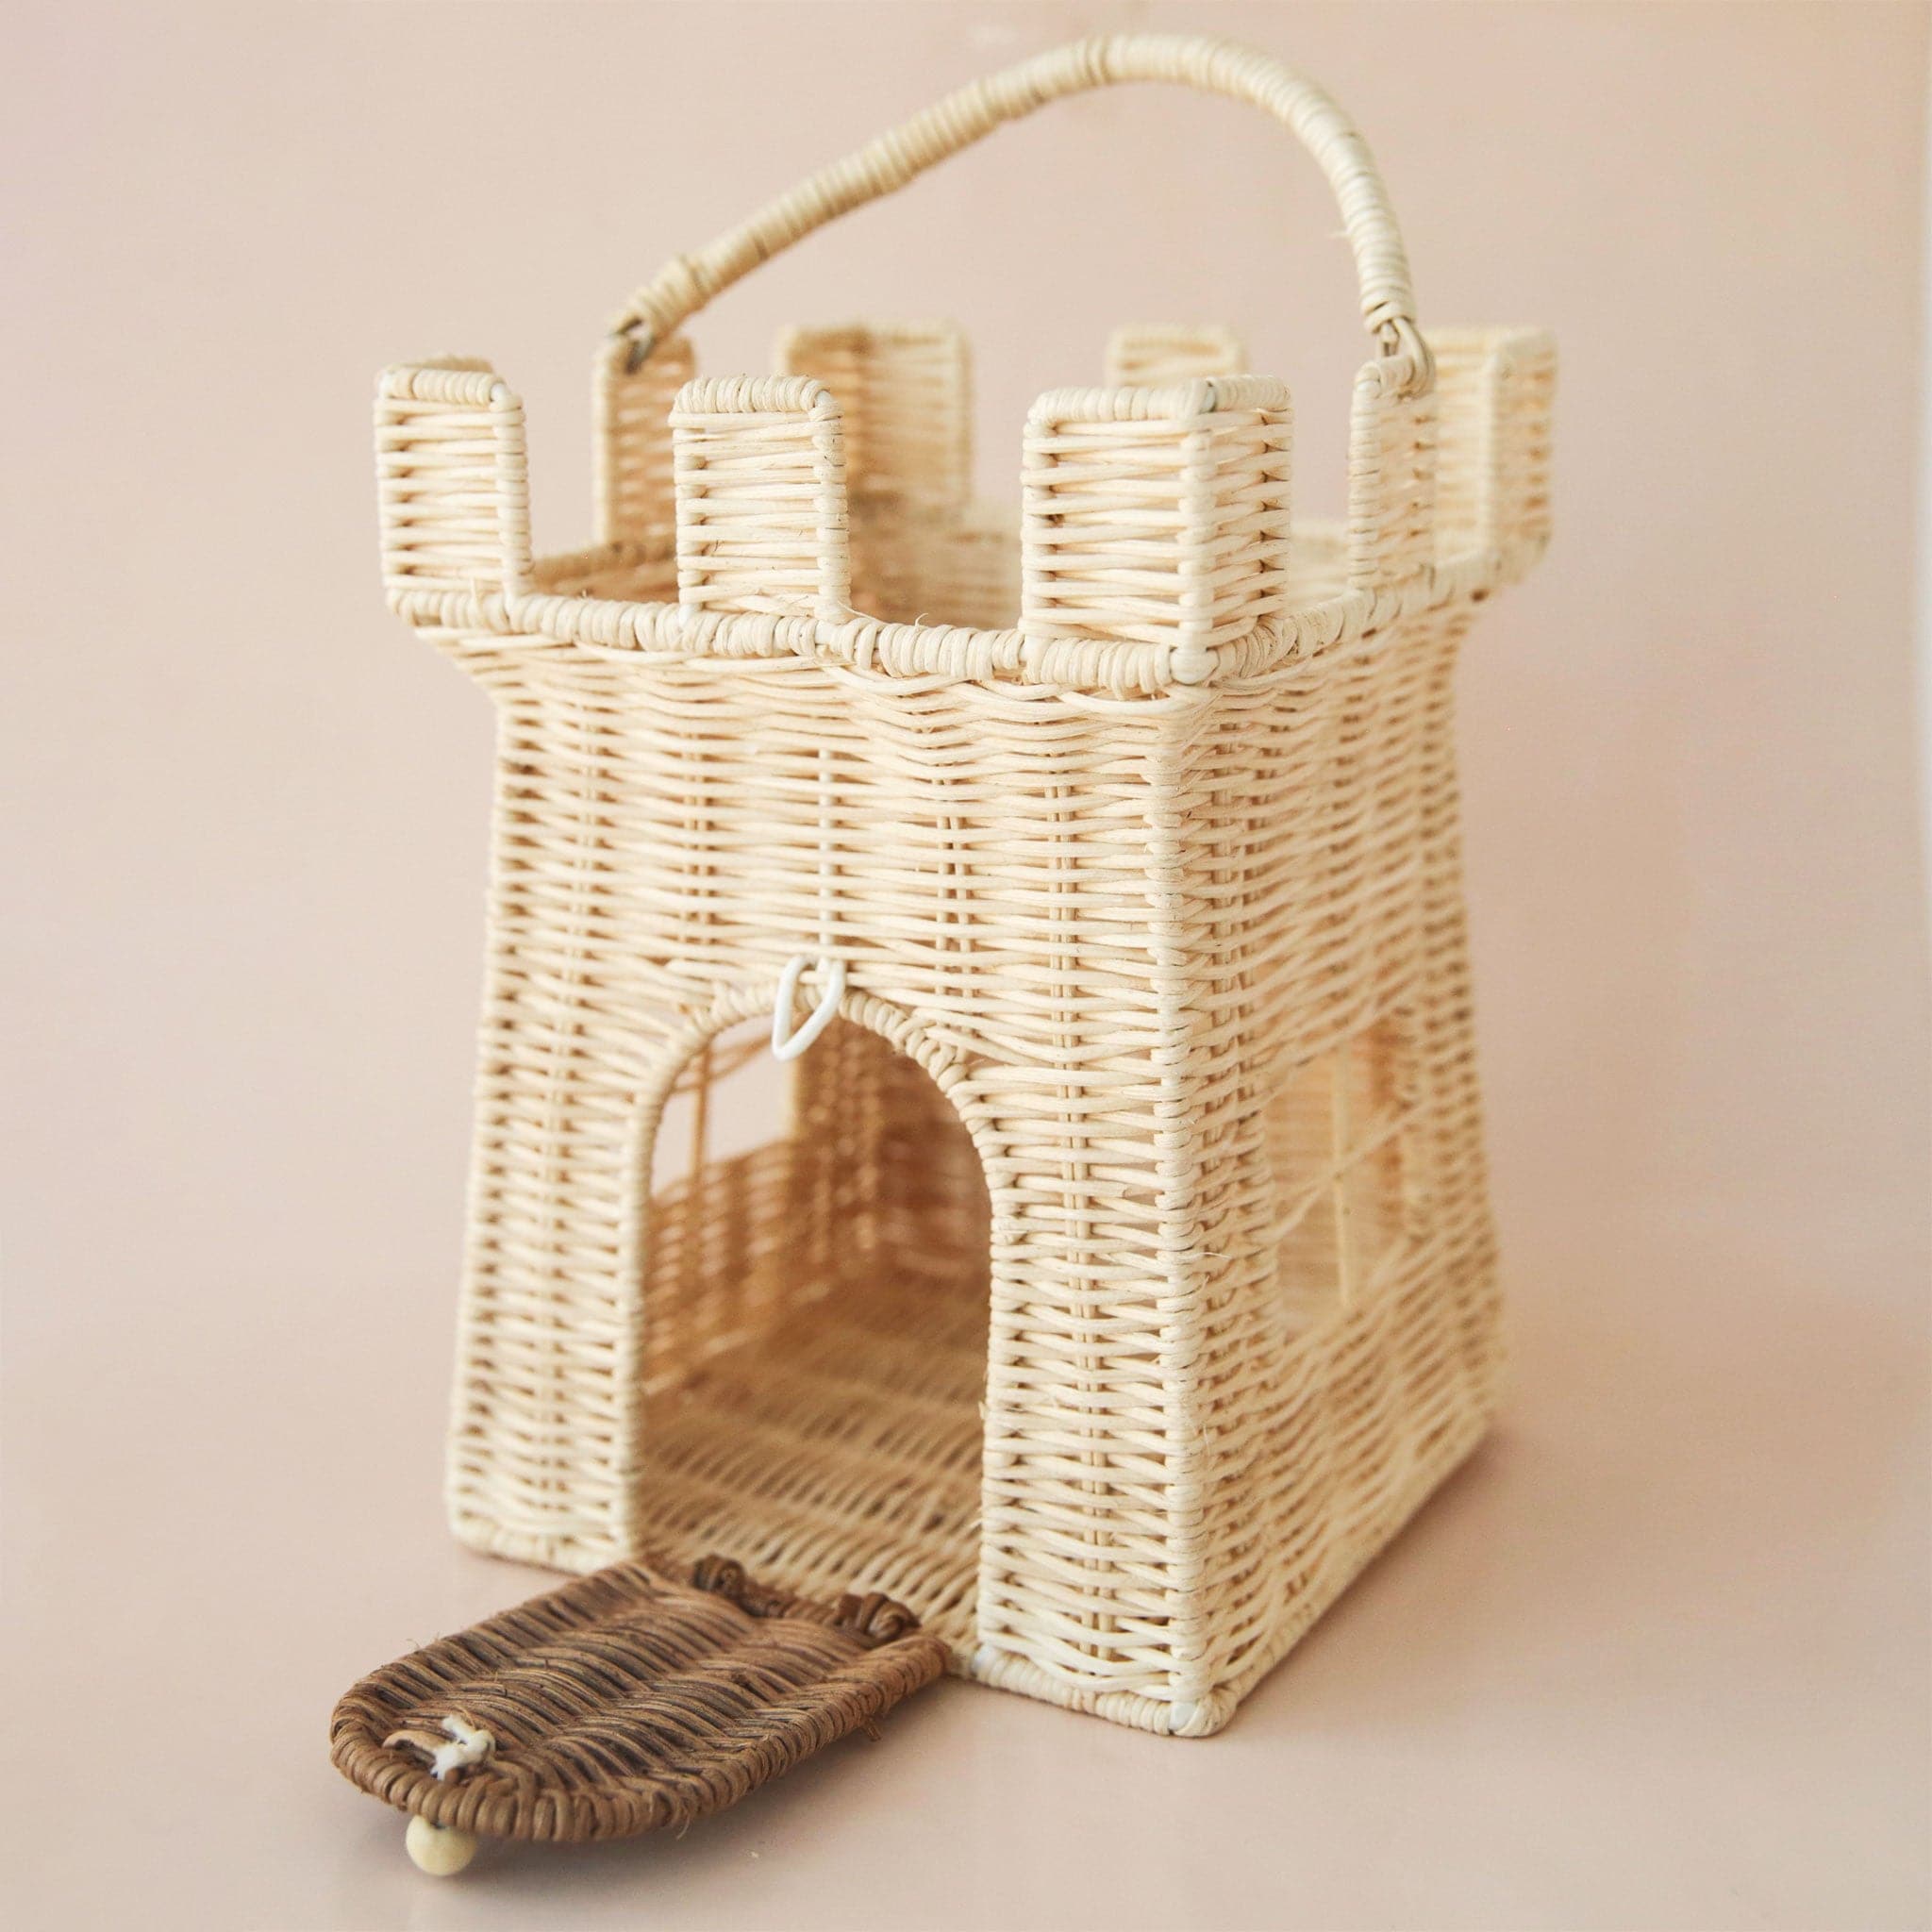 A wicker castle shaped basket with an open top as well as an opening where the door of the castle is. Also included is an attached handle for carrying around.